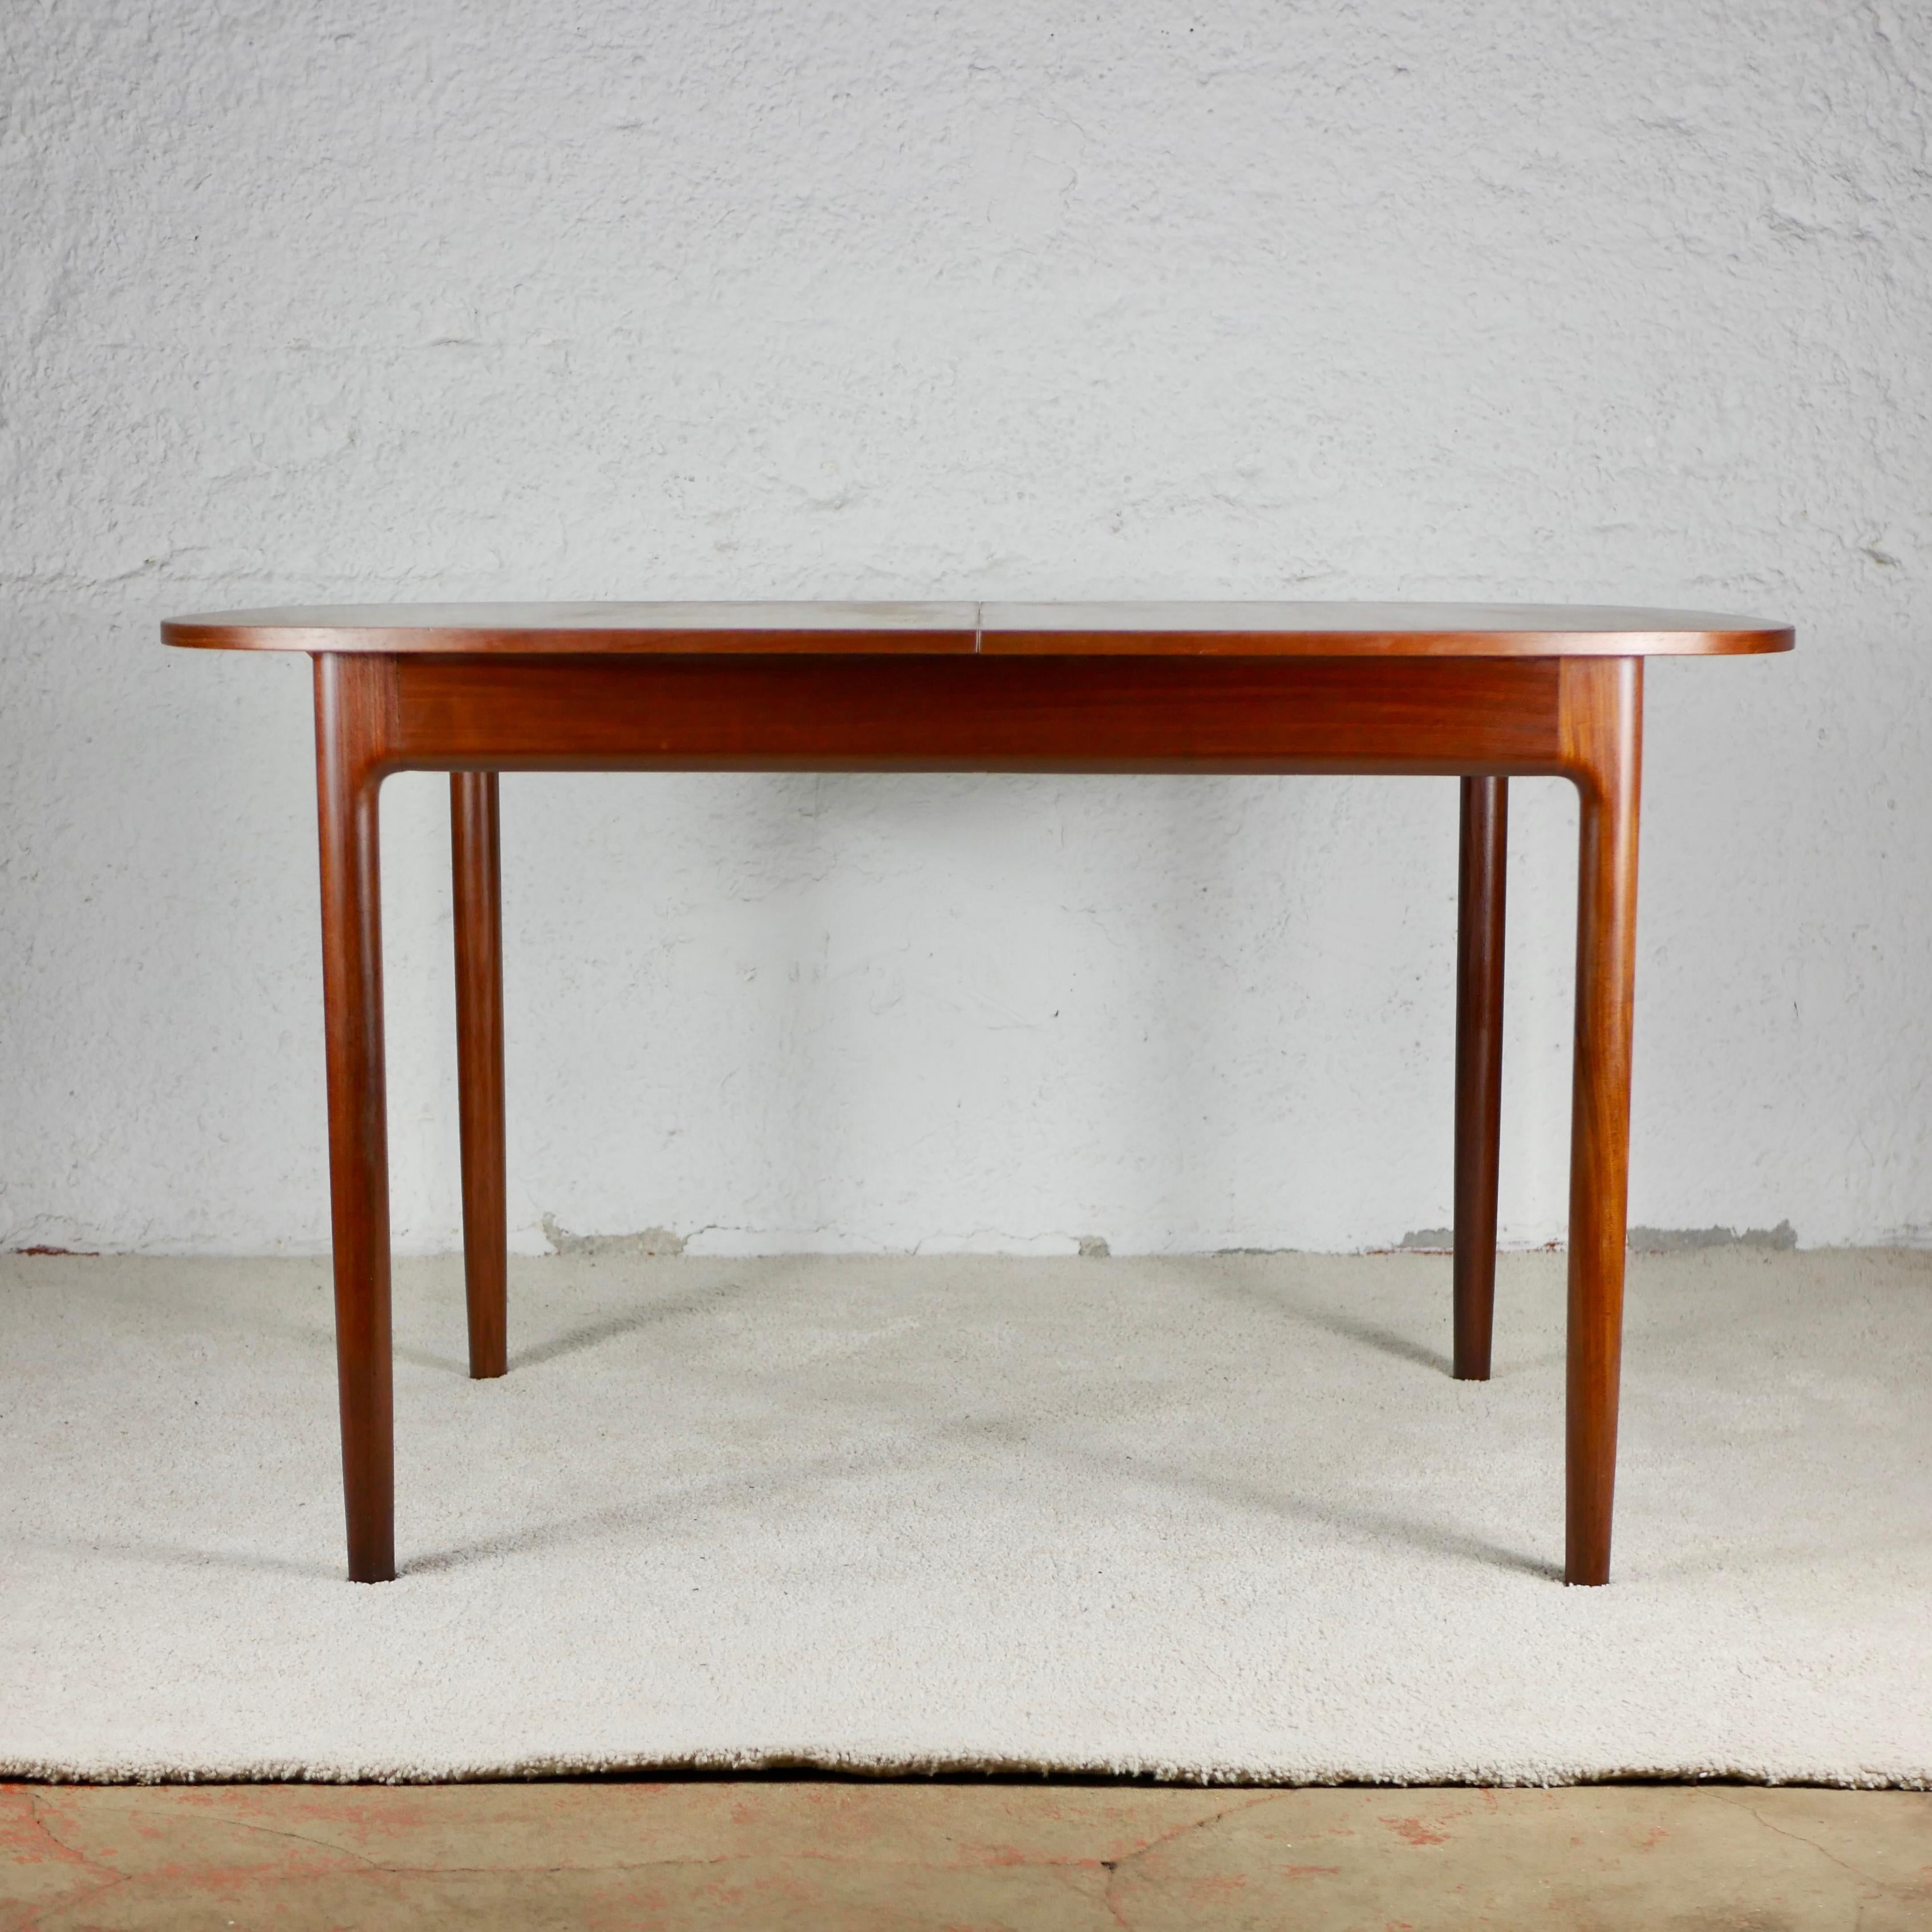 Beautiful teak expandable table designed in the 1960s by the Danish Ib Kofod Larsen, for G-Plan, England.
Butterfly extension.
Overall good condition, light scratches and discolorings, hence the price.

From 4/6 to 8 persons.
From 127 to 170cm long.
